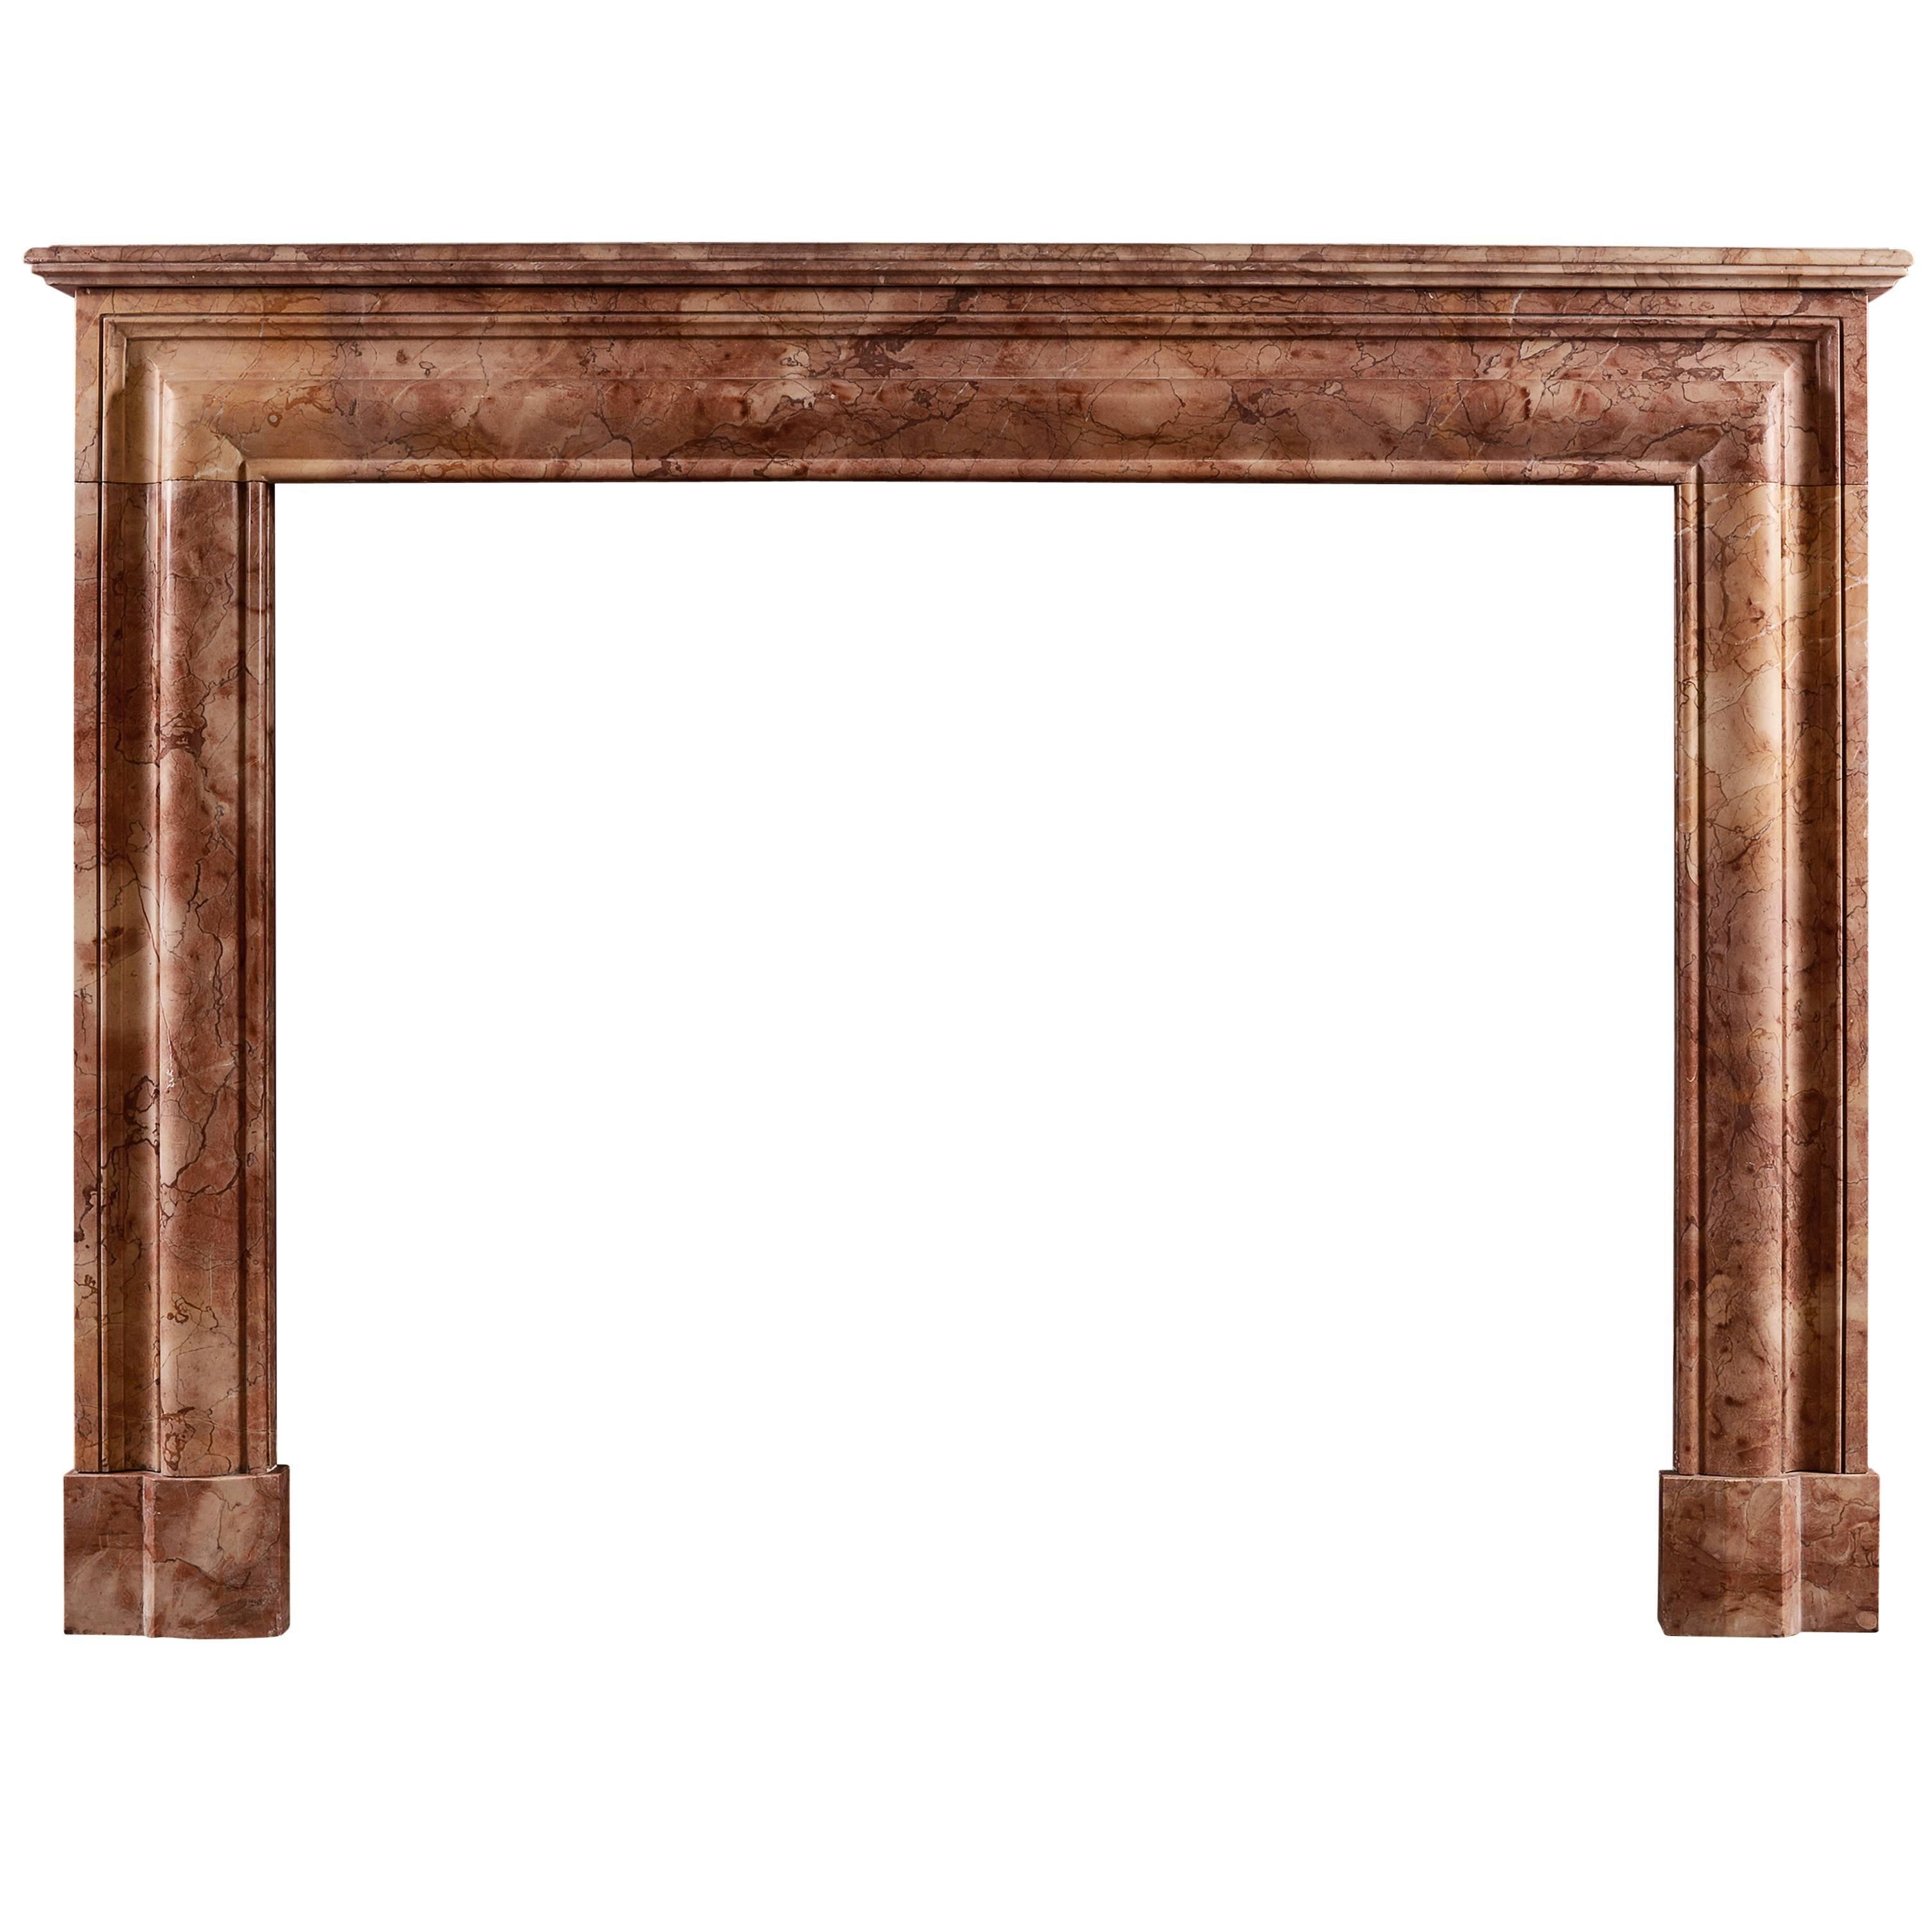 Architectural Fireplace in Rosso Verona Marble